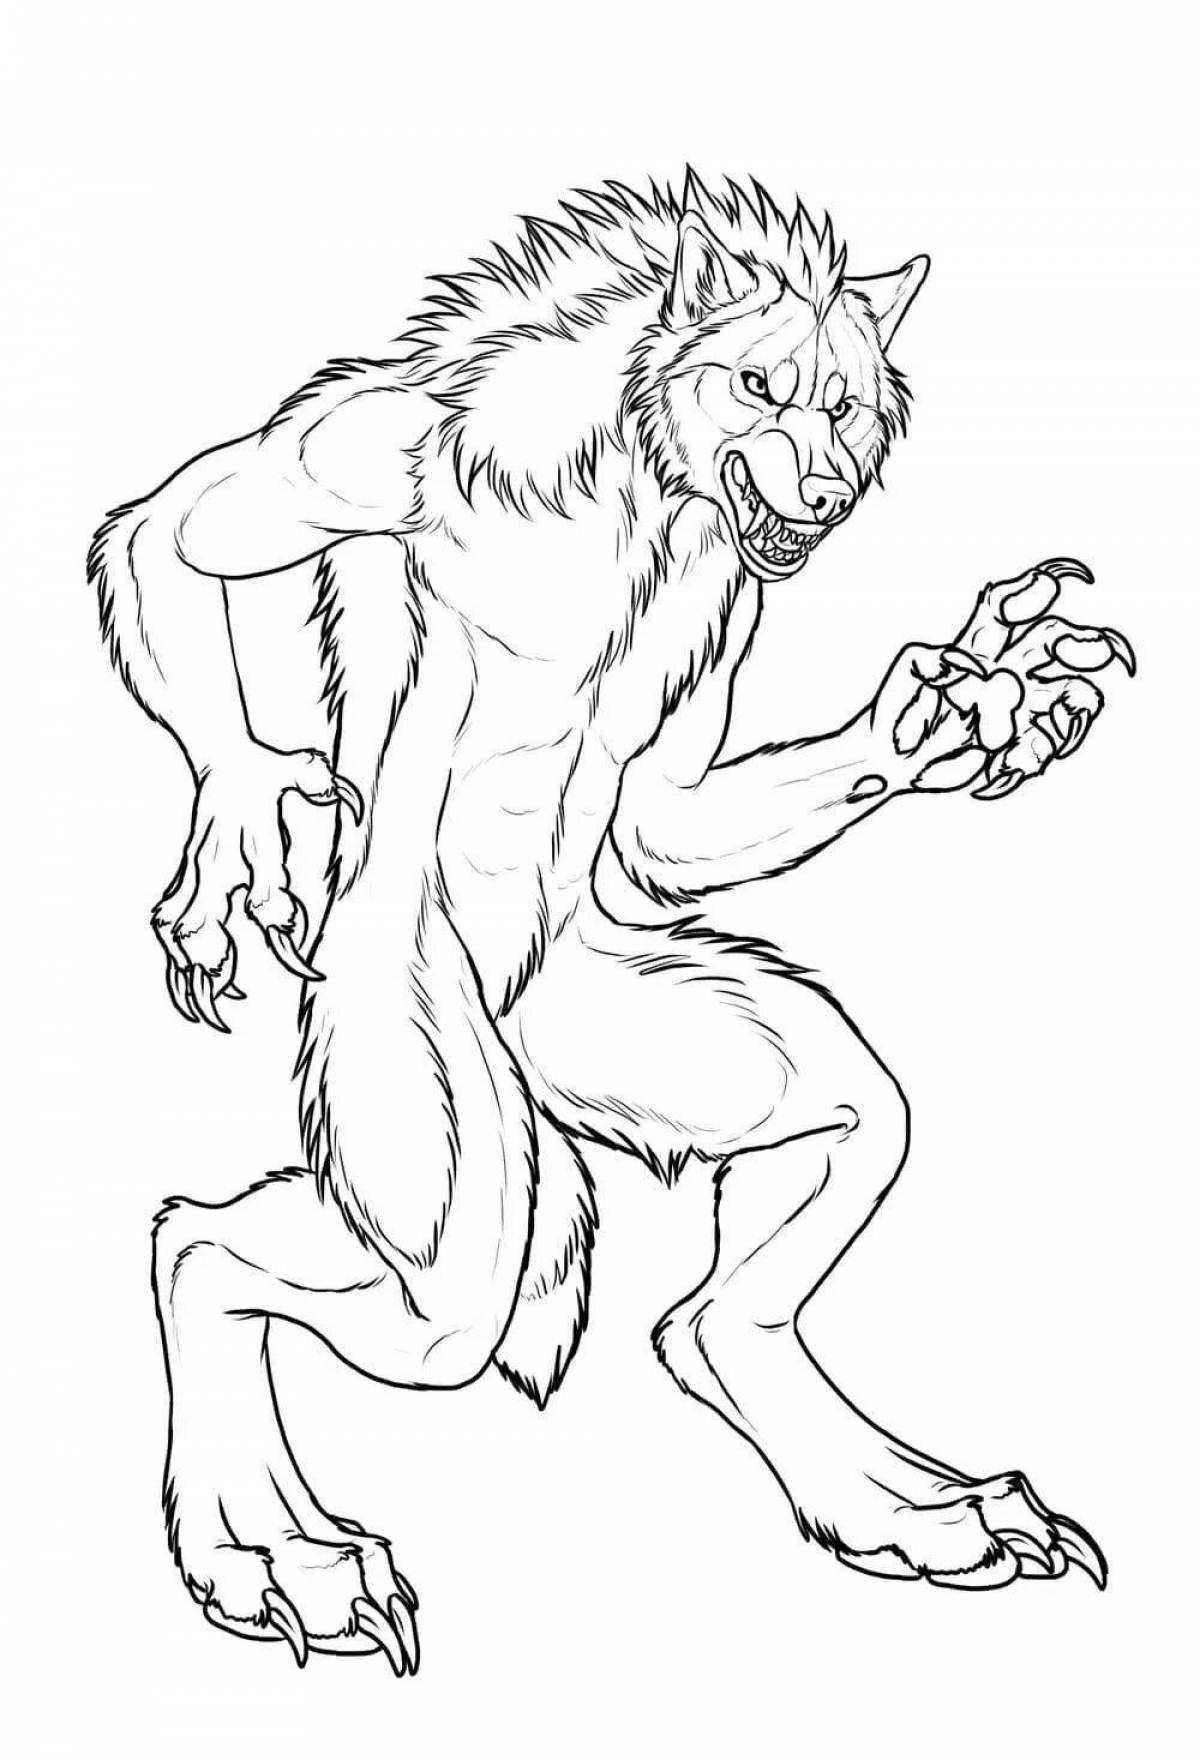 Disgusting werewolf coloring pages for kids